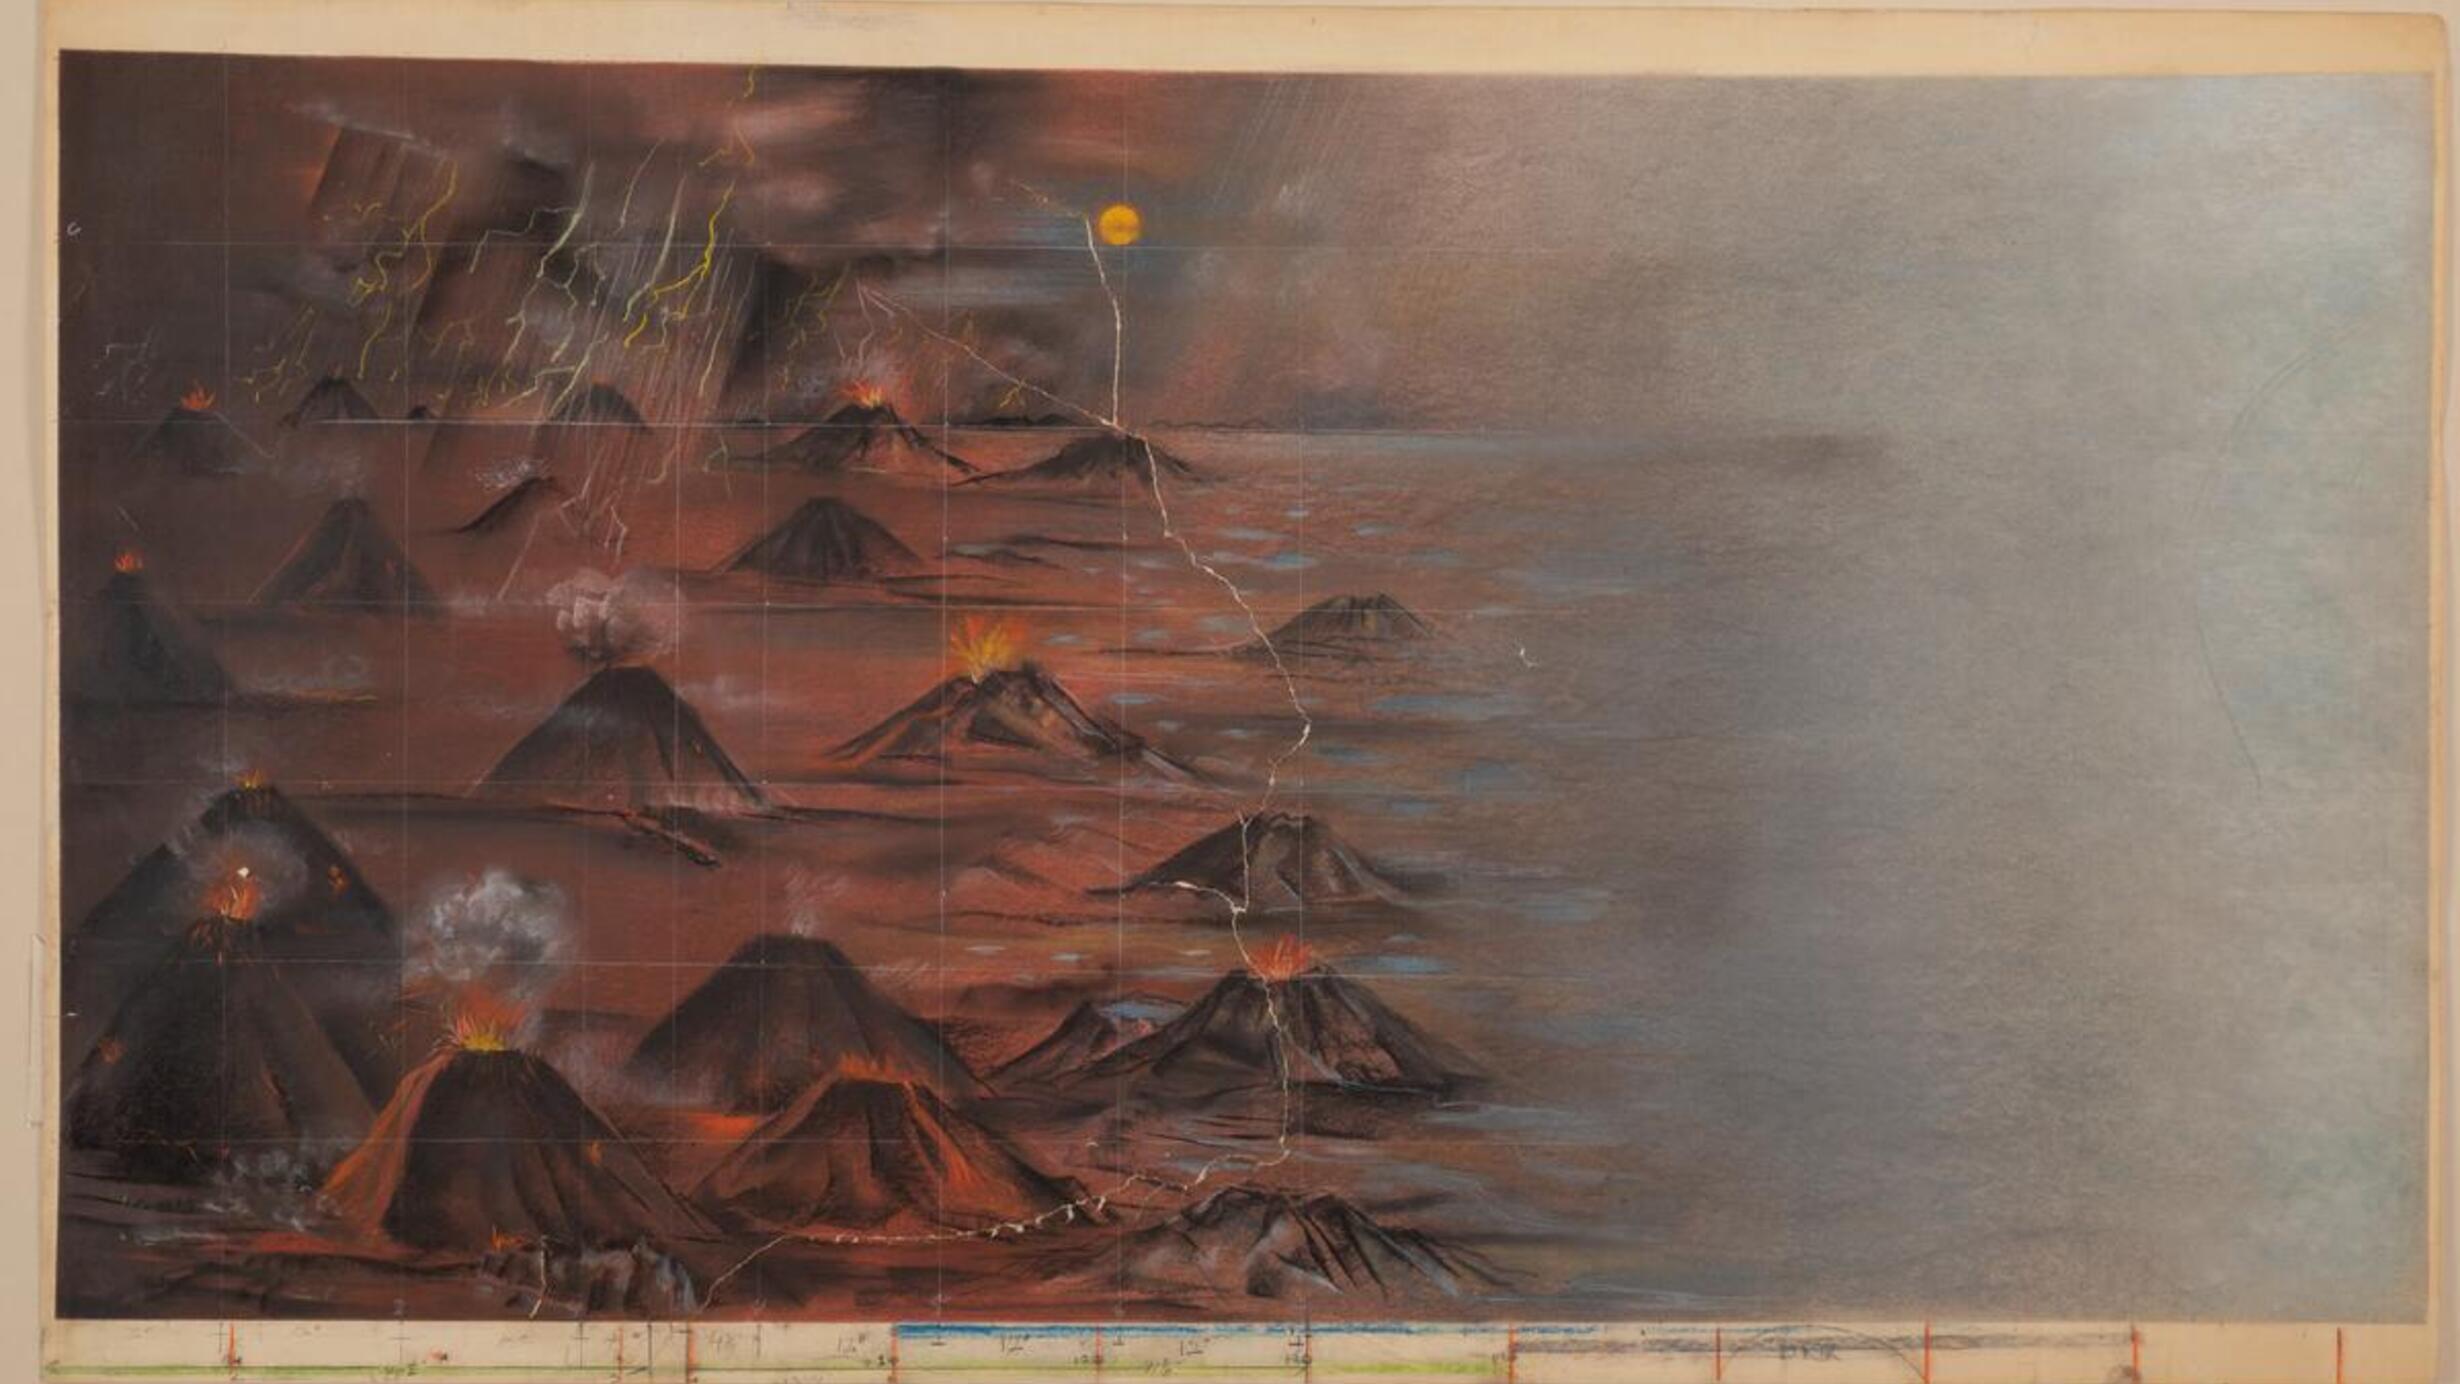 Study for the Origin of Life case, Charles Henry Alston, 1964, AMNH Library image: art-100101660-01